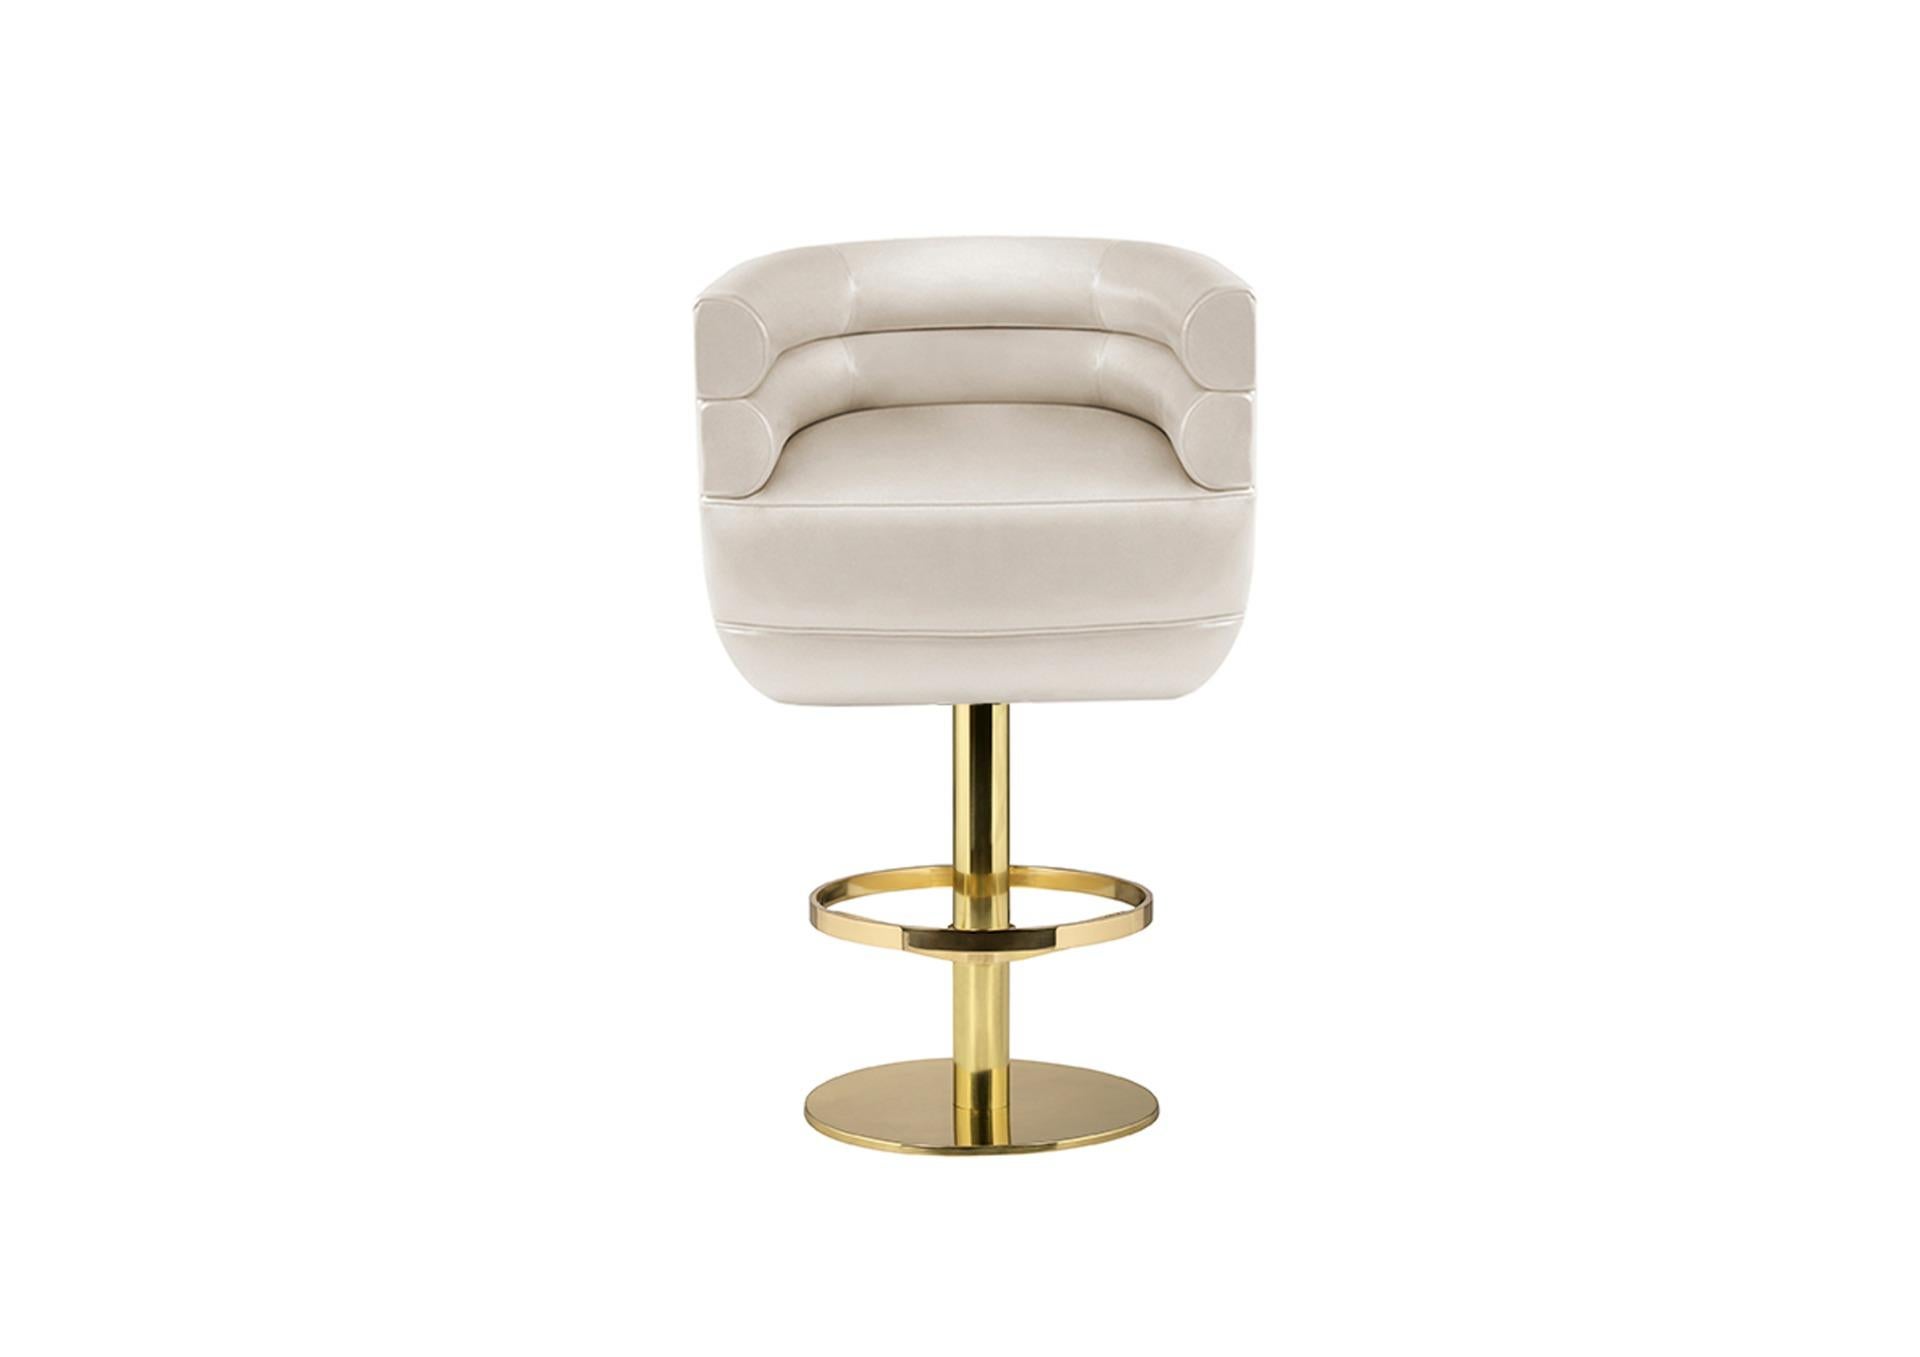 Inspired in the mid-century design but with a contemporary look, Loren is a posh accent bar chair with sinuous curves on its back. Supported by a round polished brass base and a footrest for comfort, Loren is upholstered in a creamy leather and a